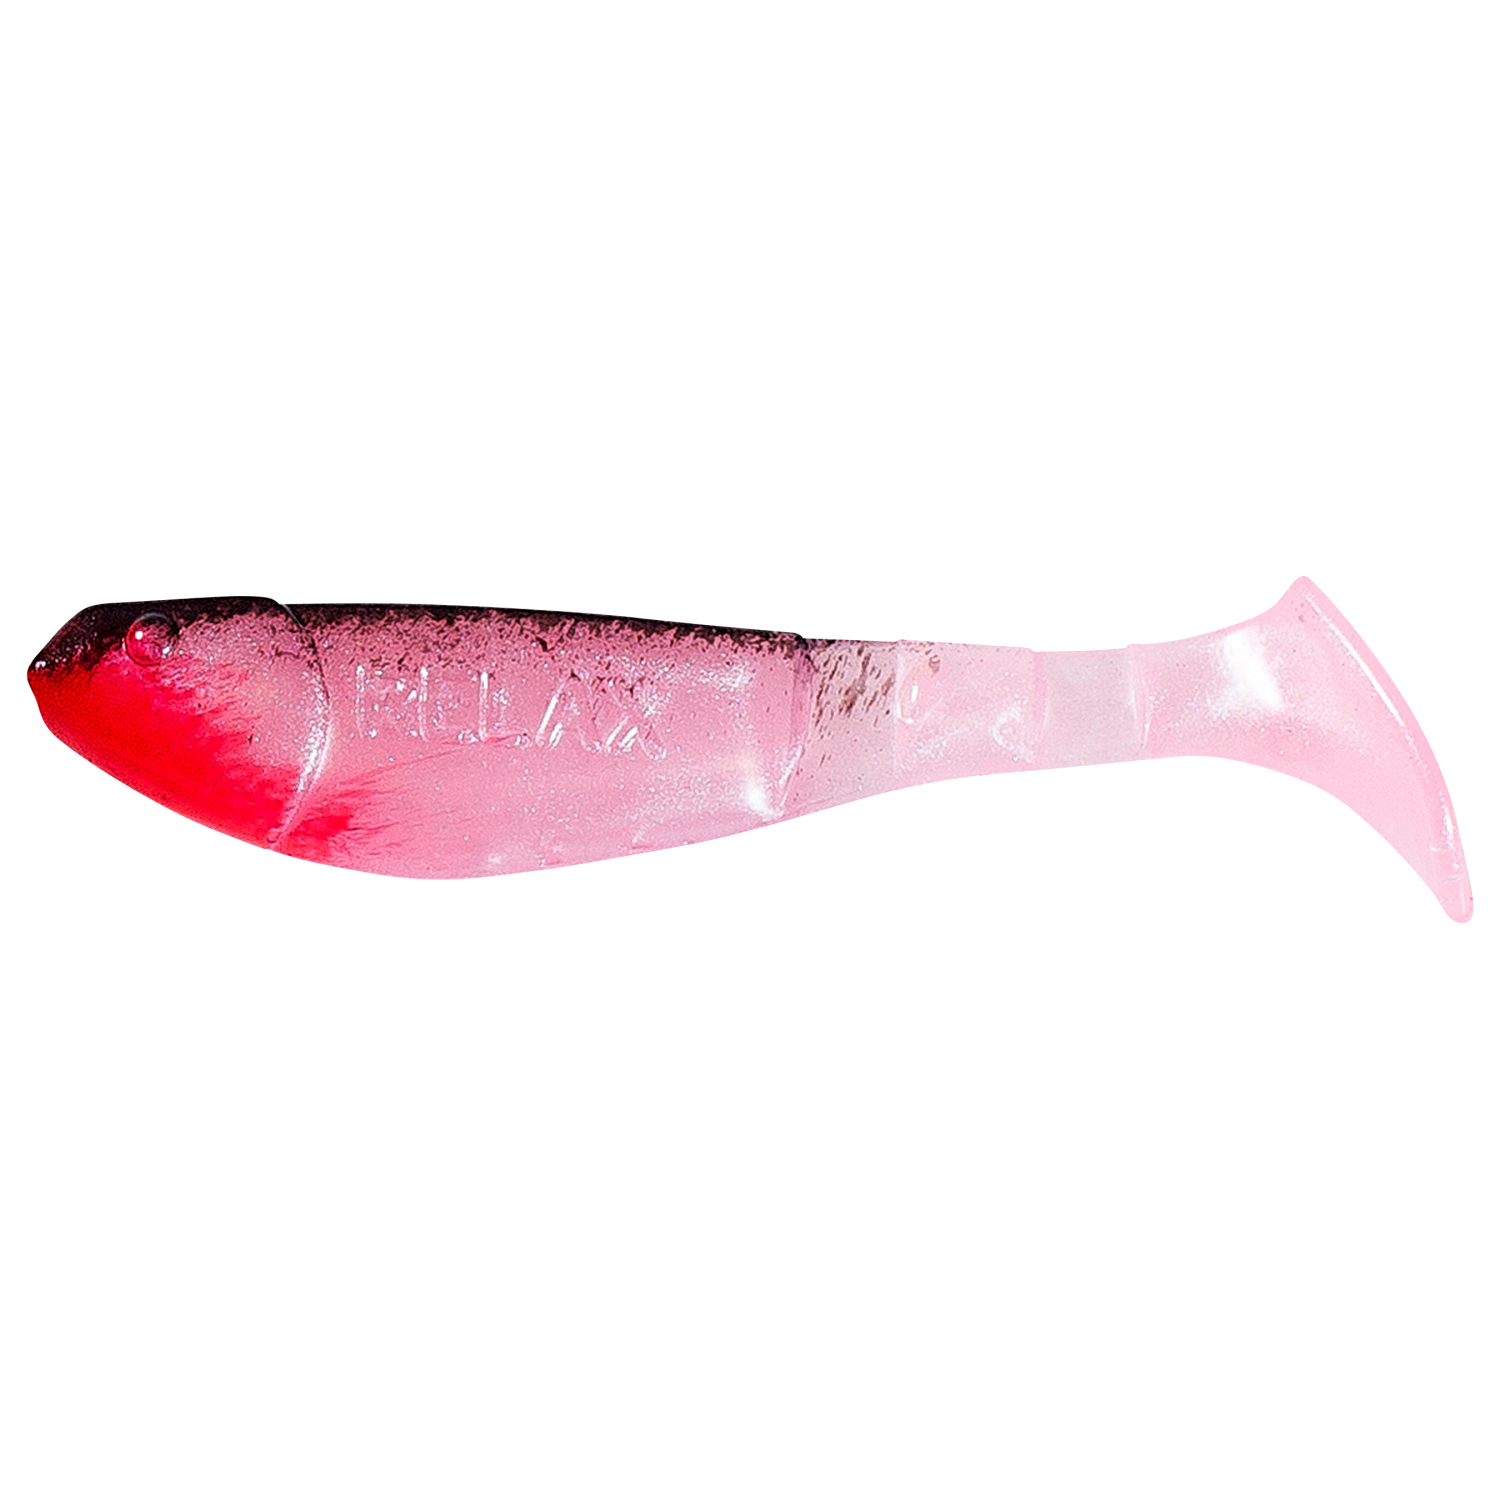 ShadXperts ShadXperts Kopyto-Classic Shad - pink/black at low